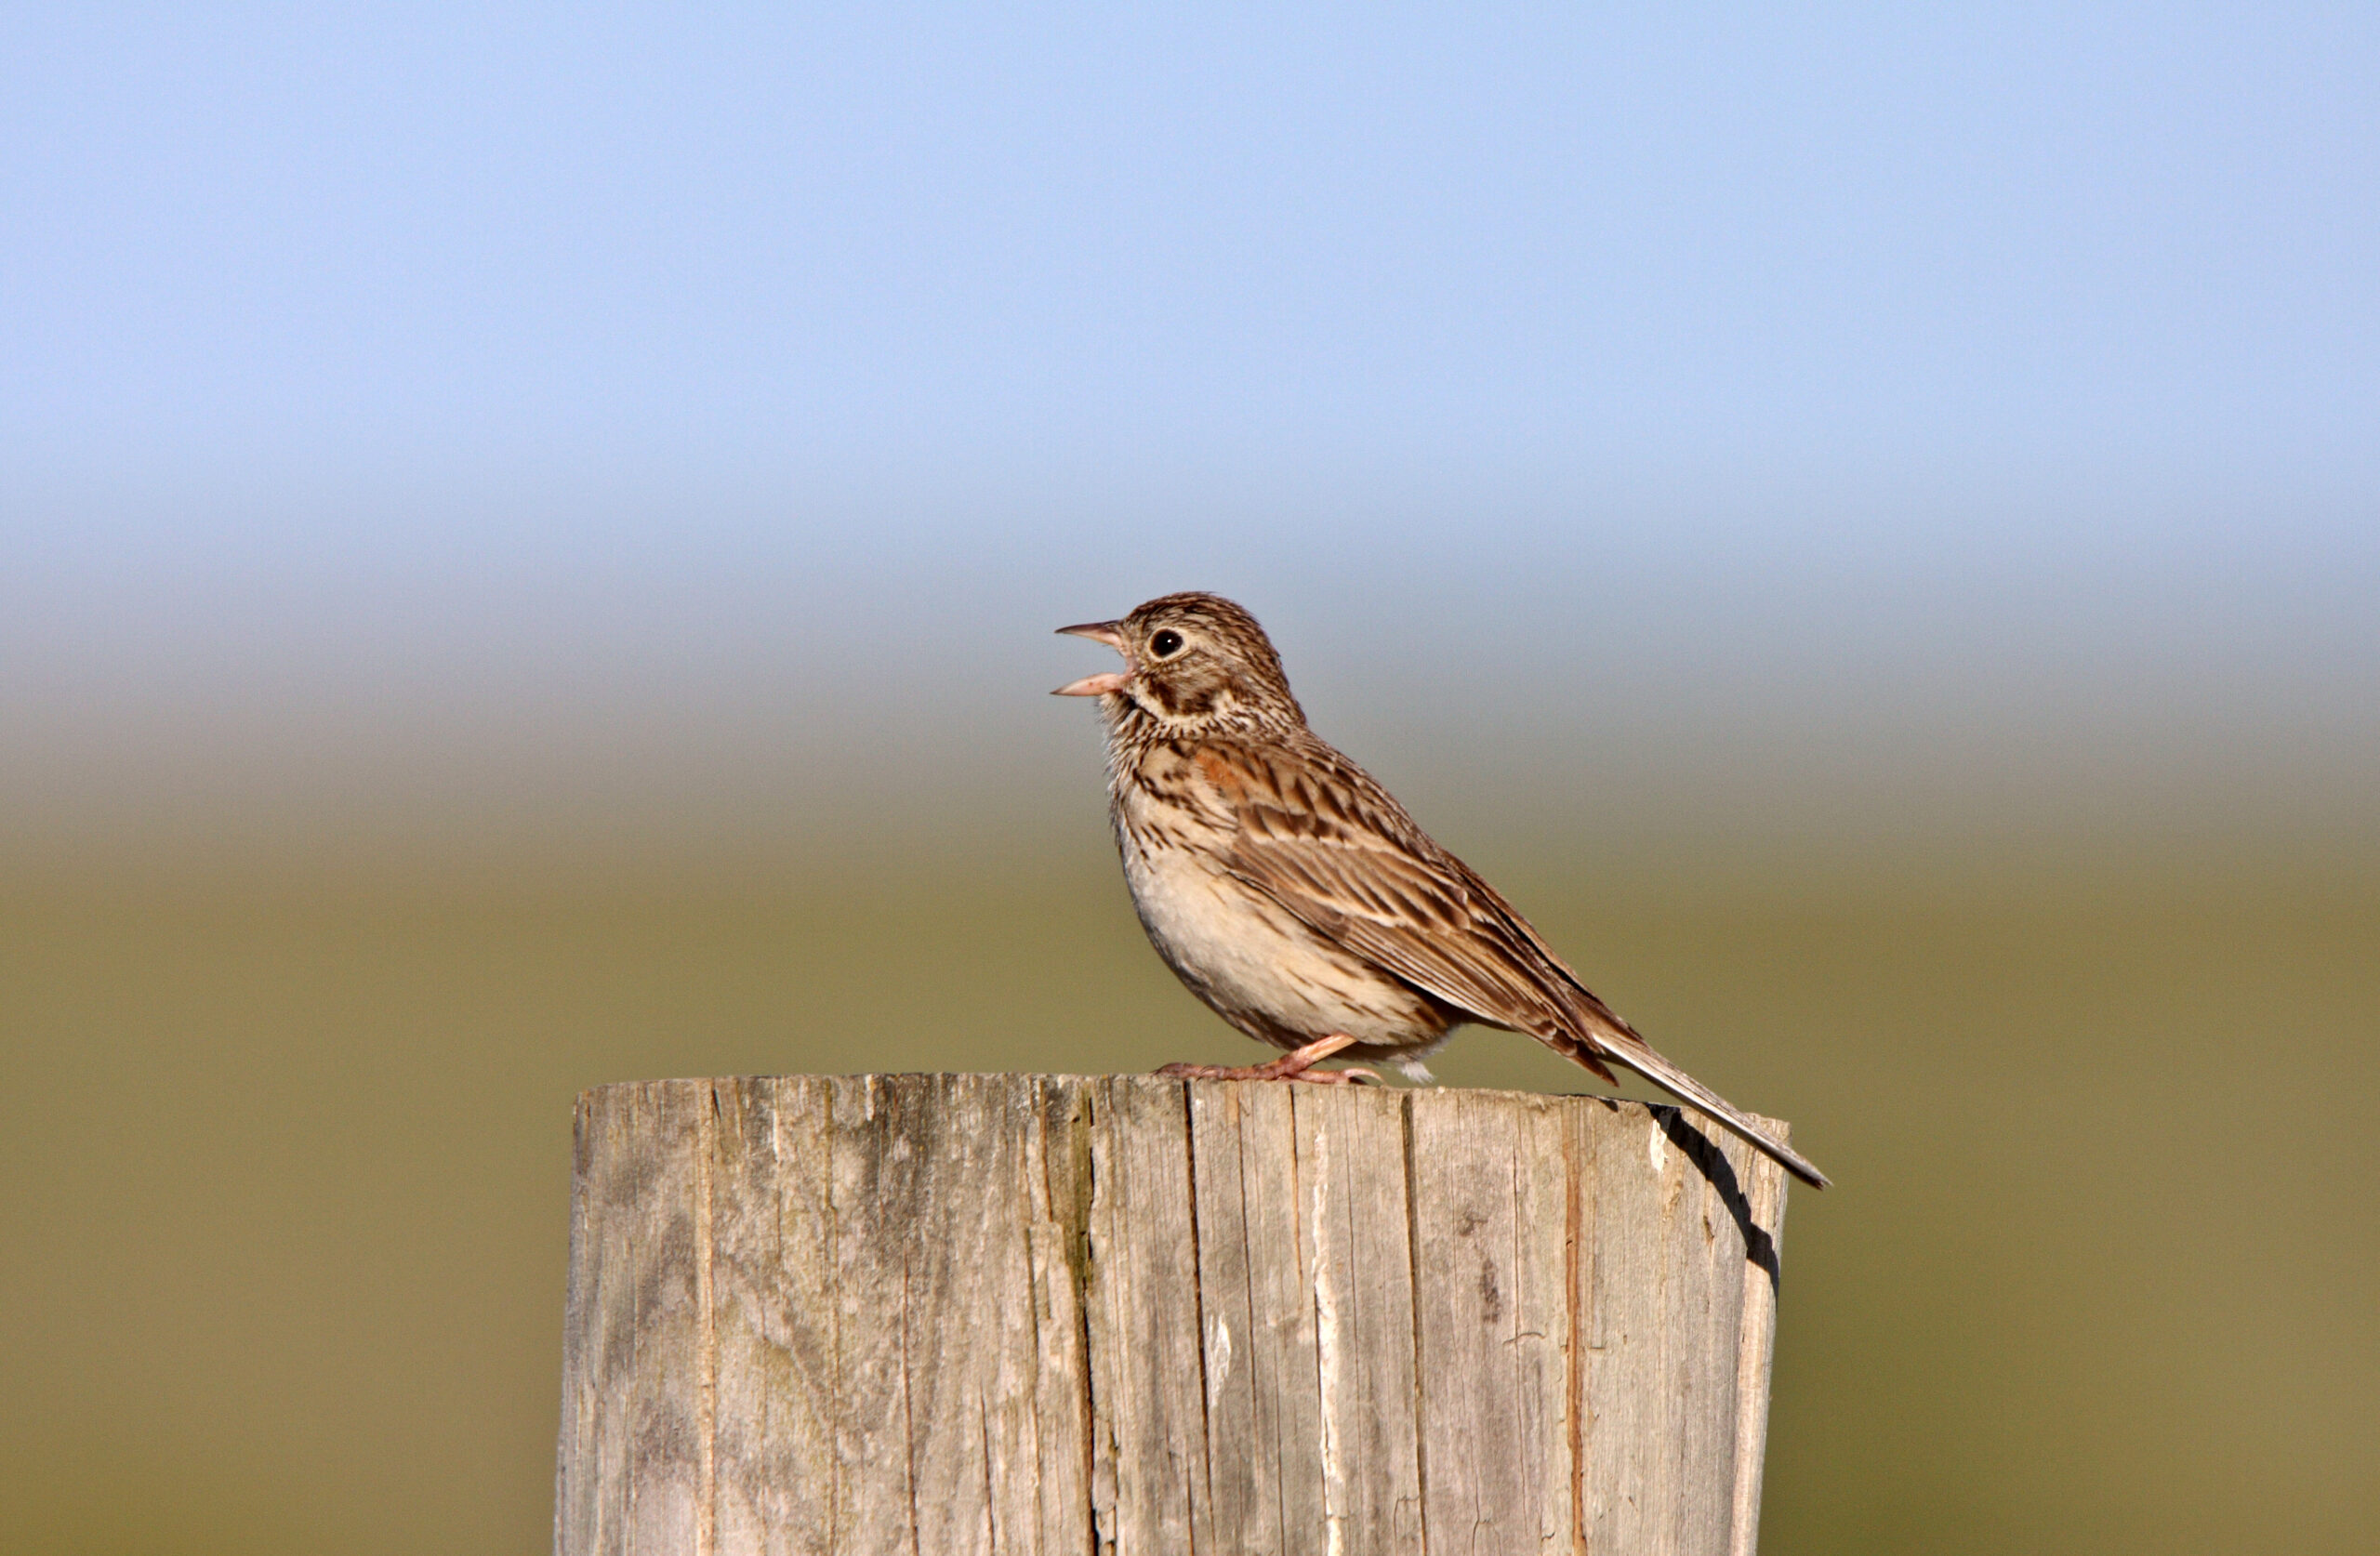 The Song Sparrow